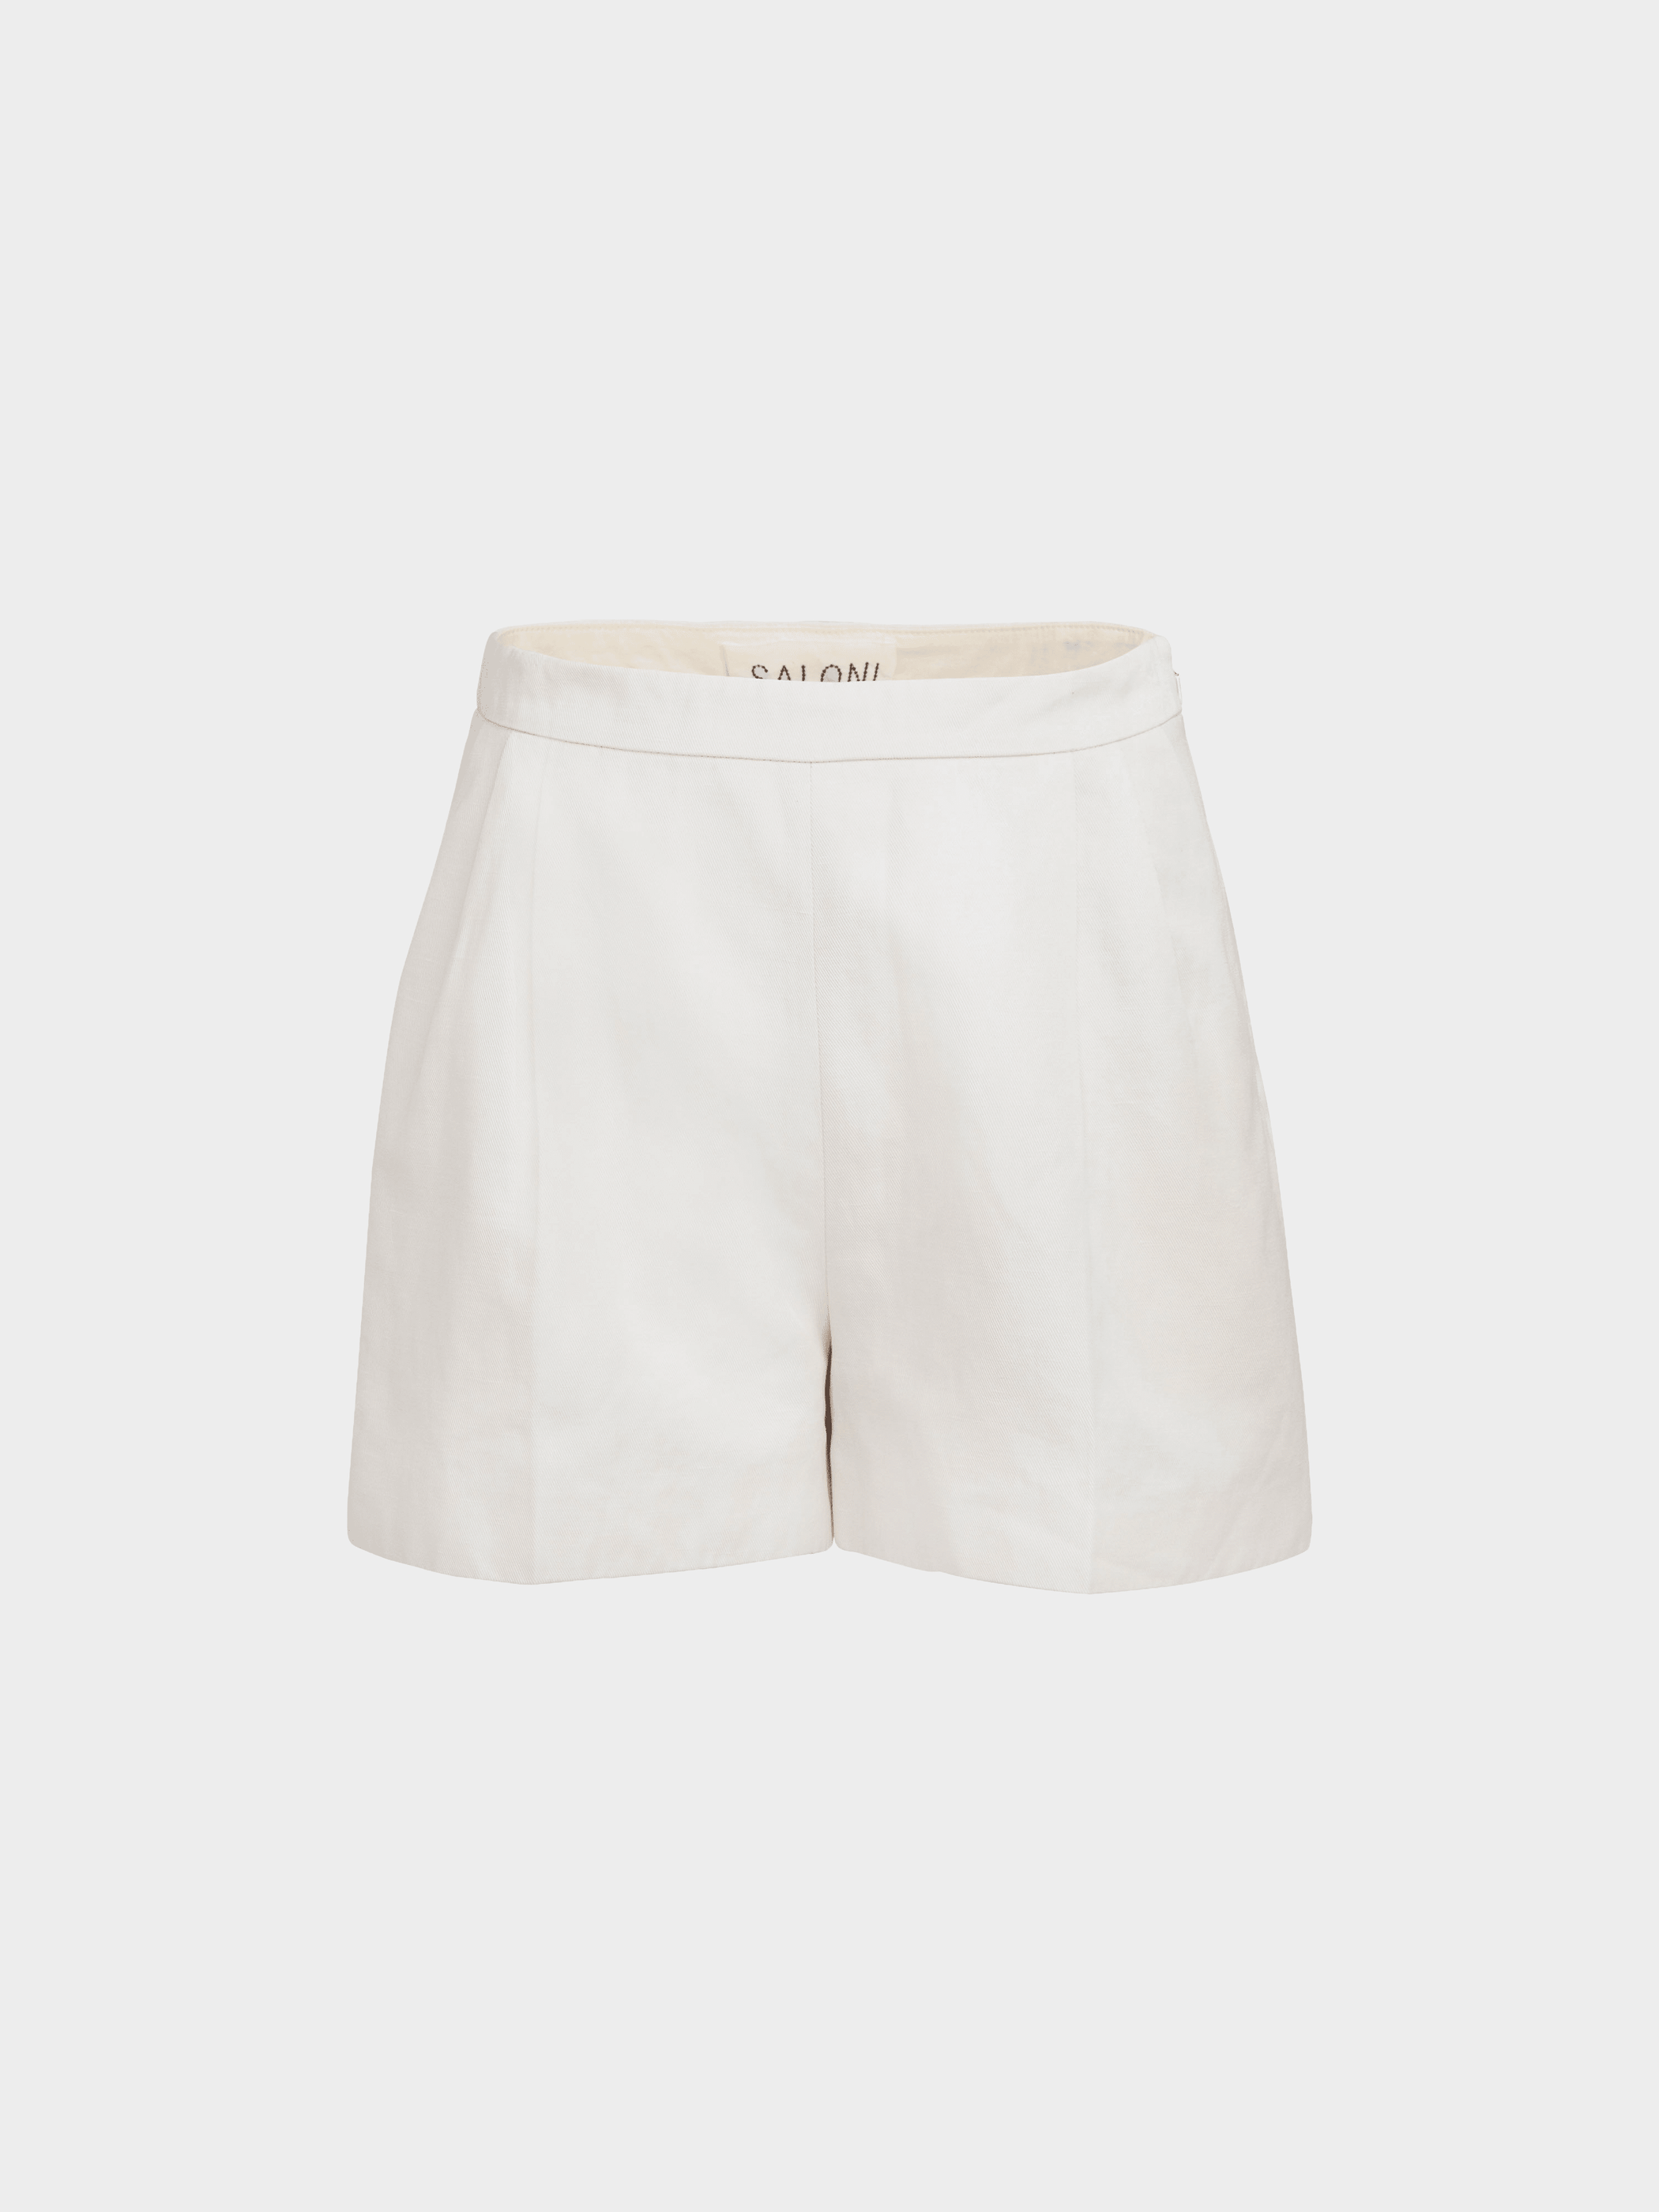 Wide Tailored Shorts in Cream